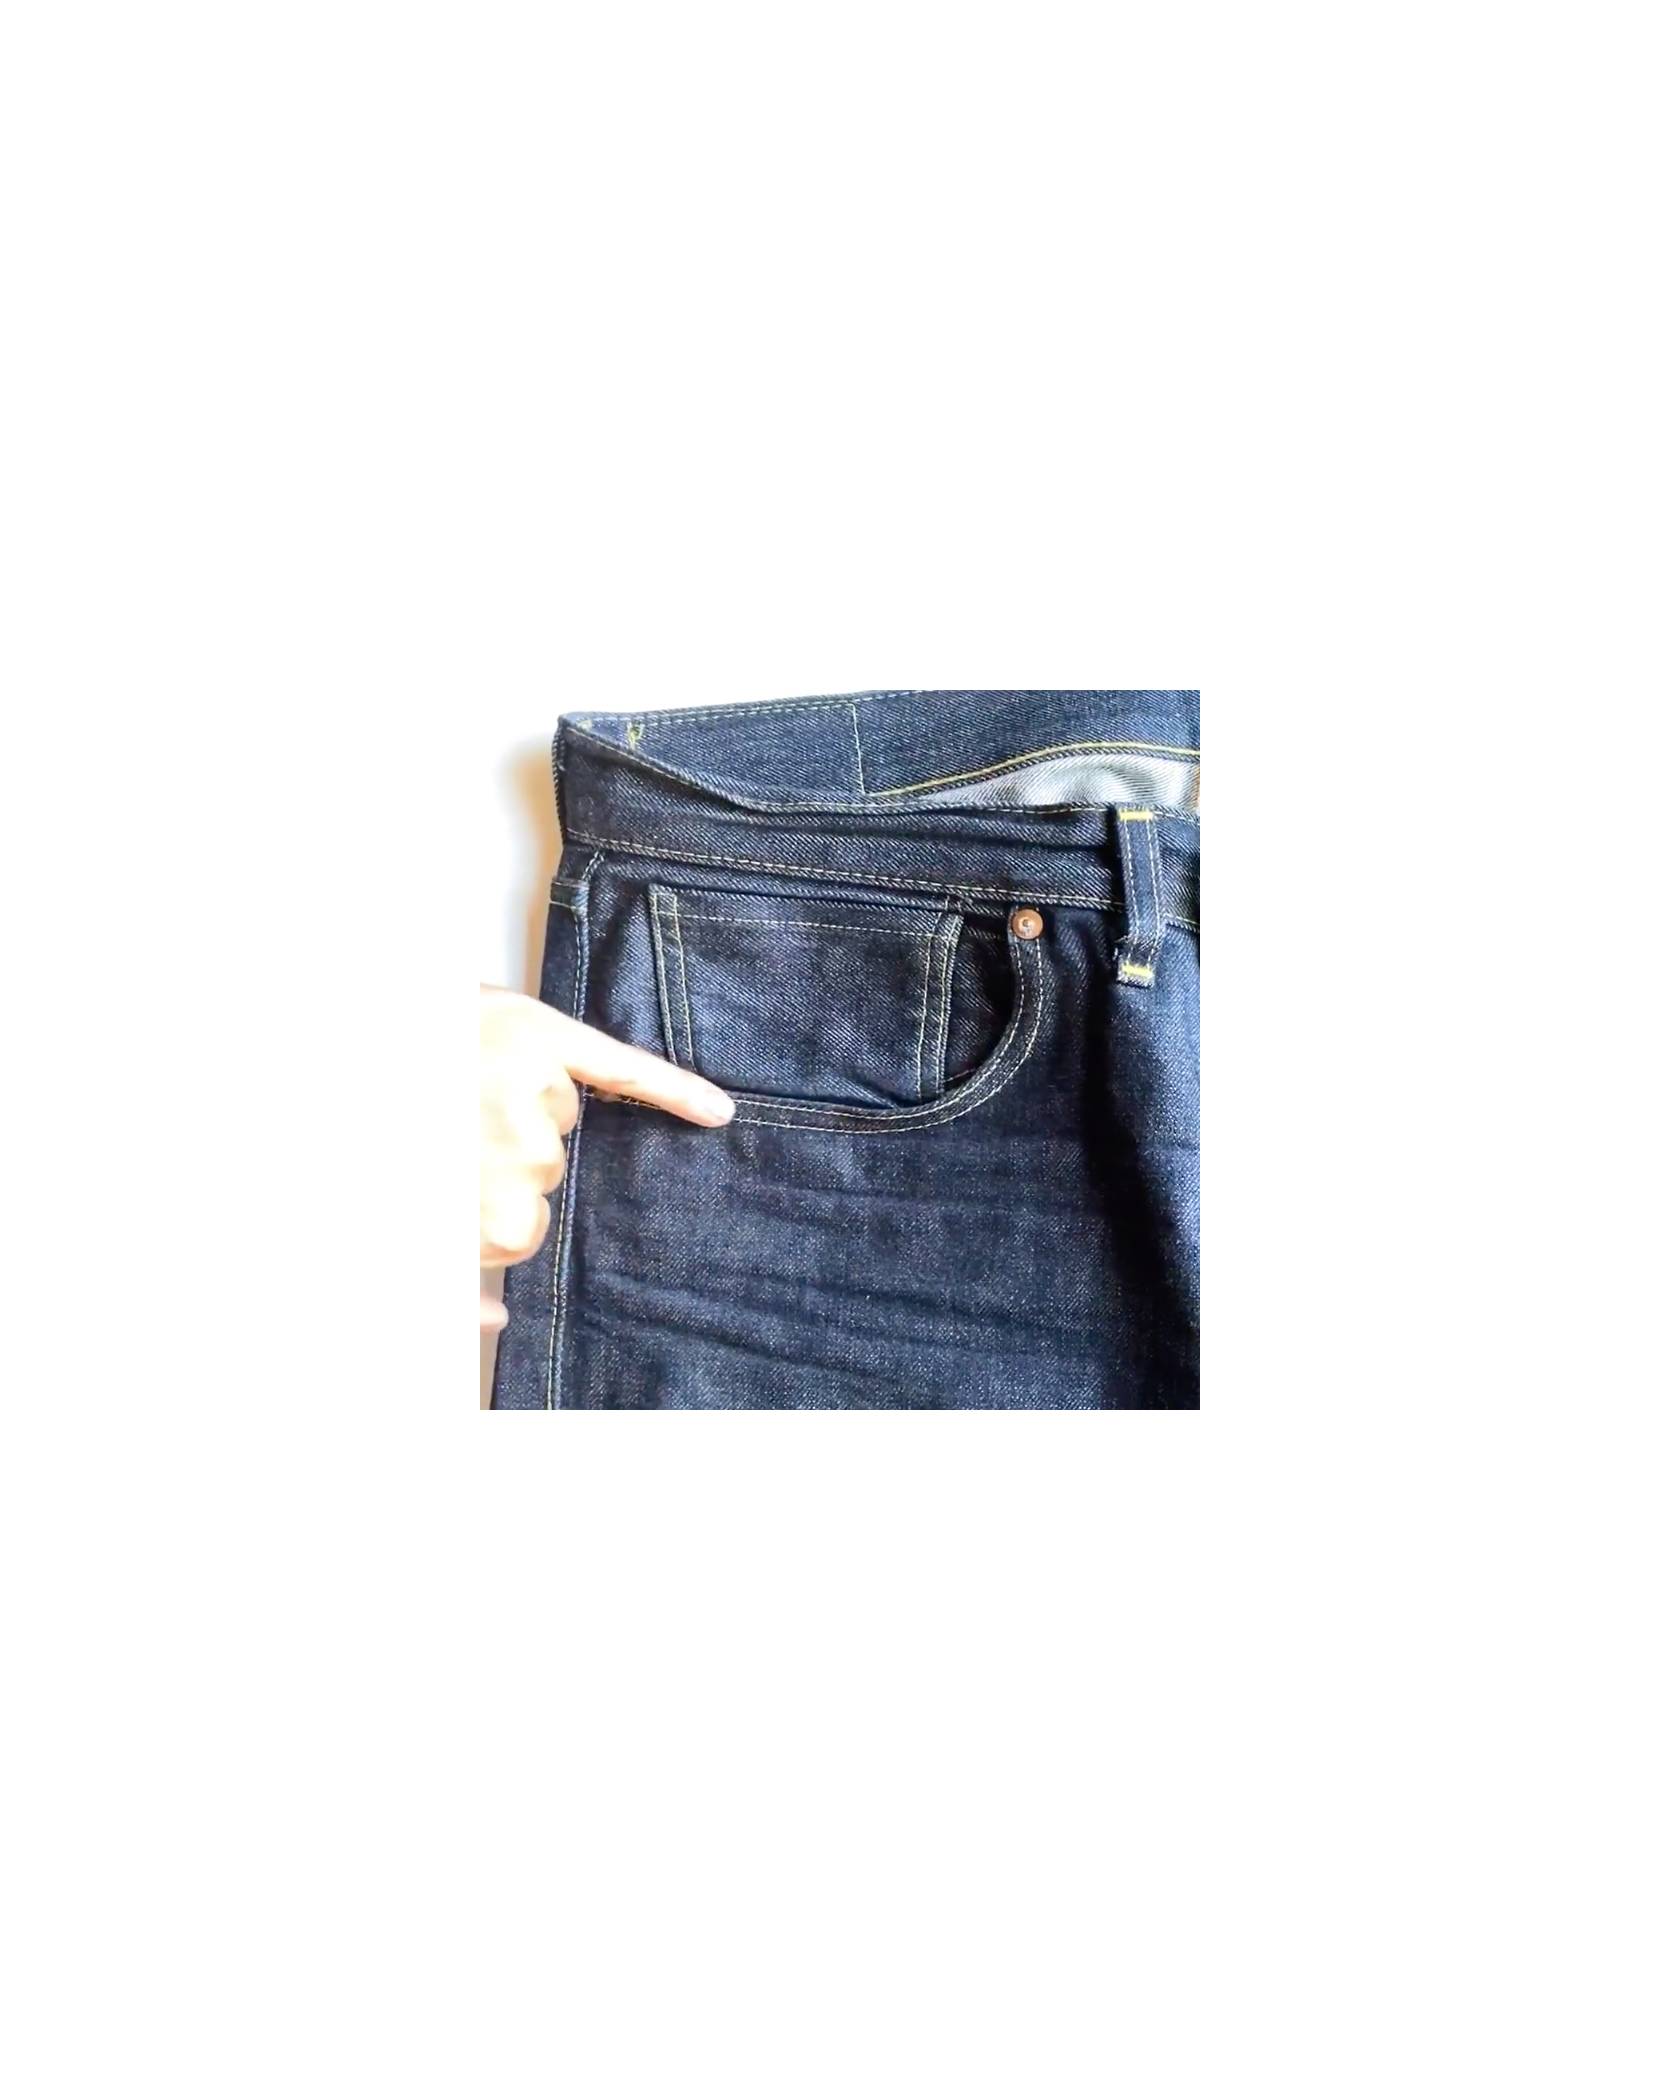 black #2 regular jeans with off white stitching